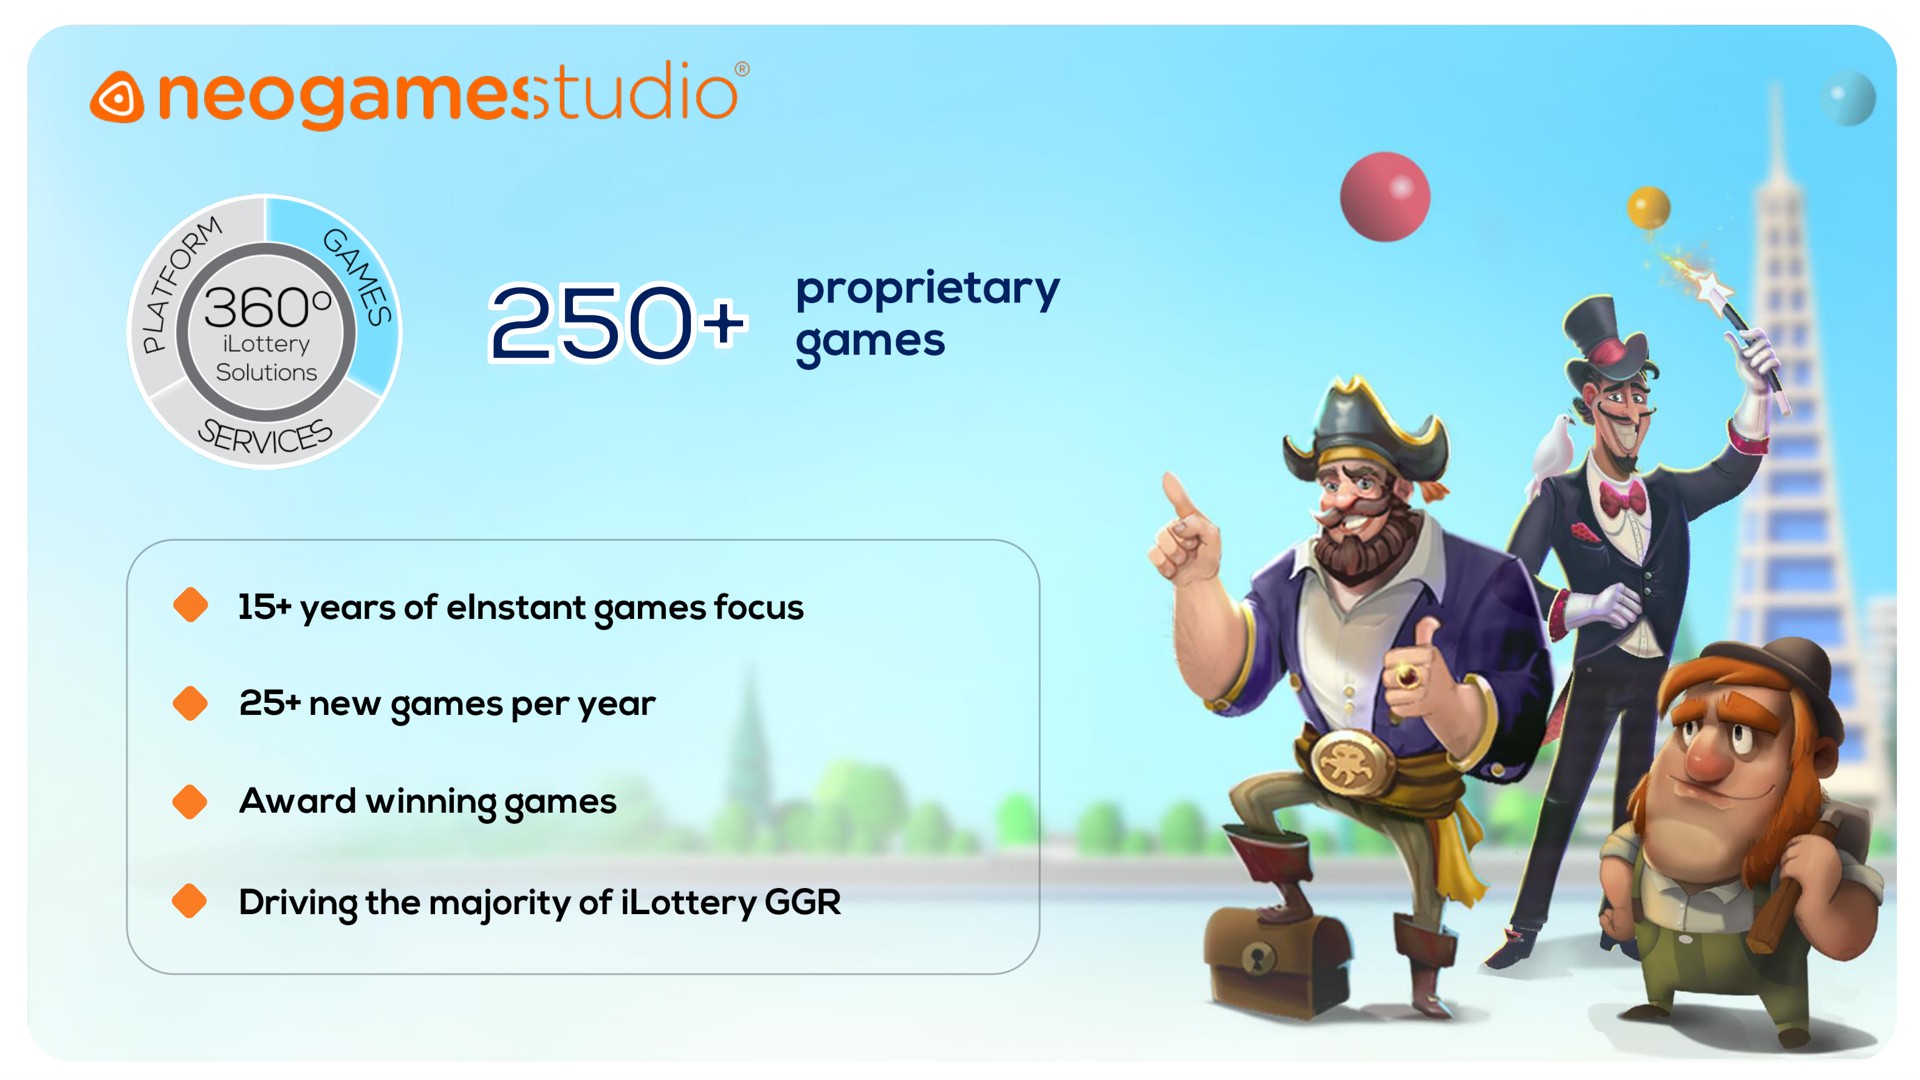 award winning games new games per year years of games focus driving the majority of | Neogames